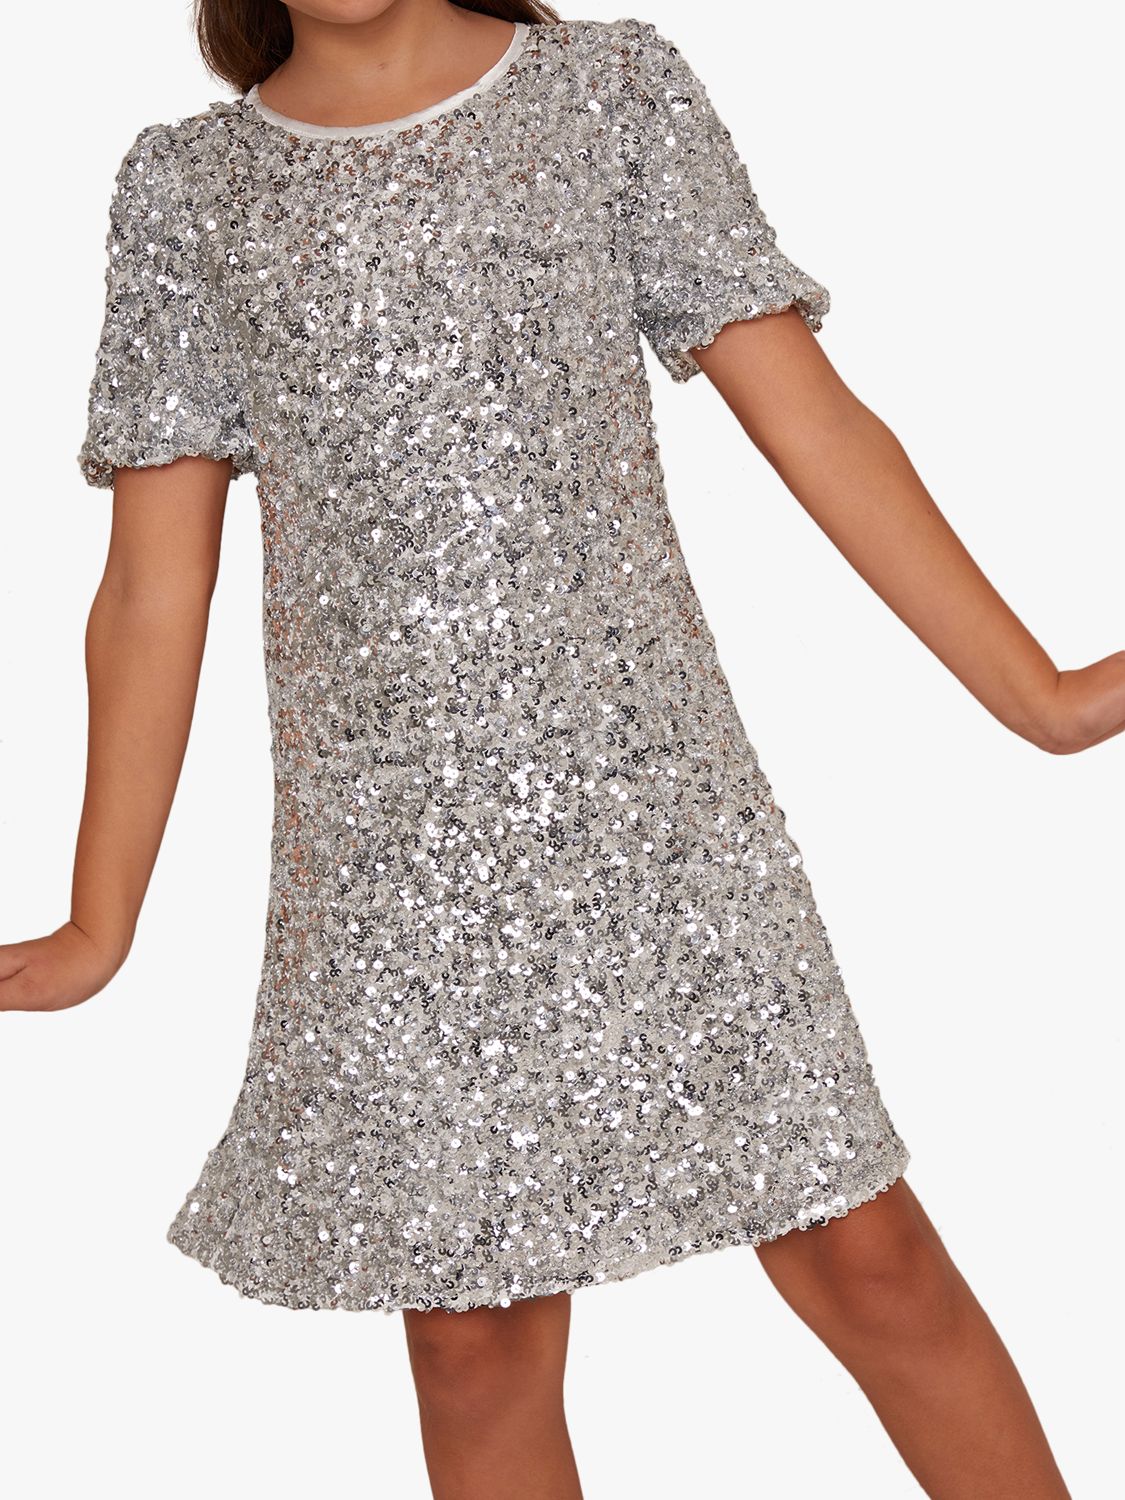 Image of Chi Chi London Girls Lila Embellished Party Dress Silver